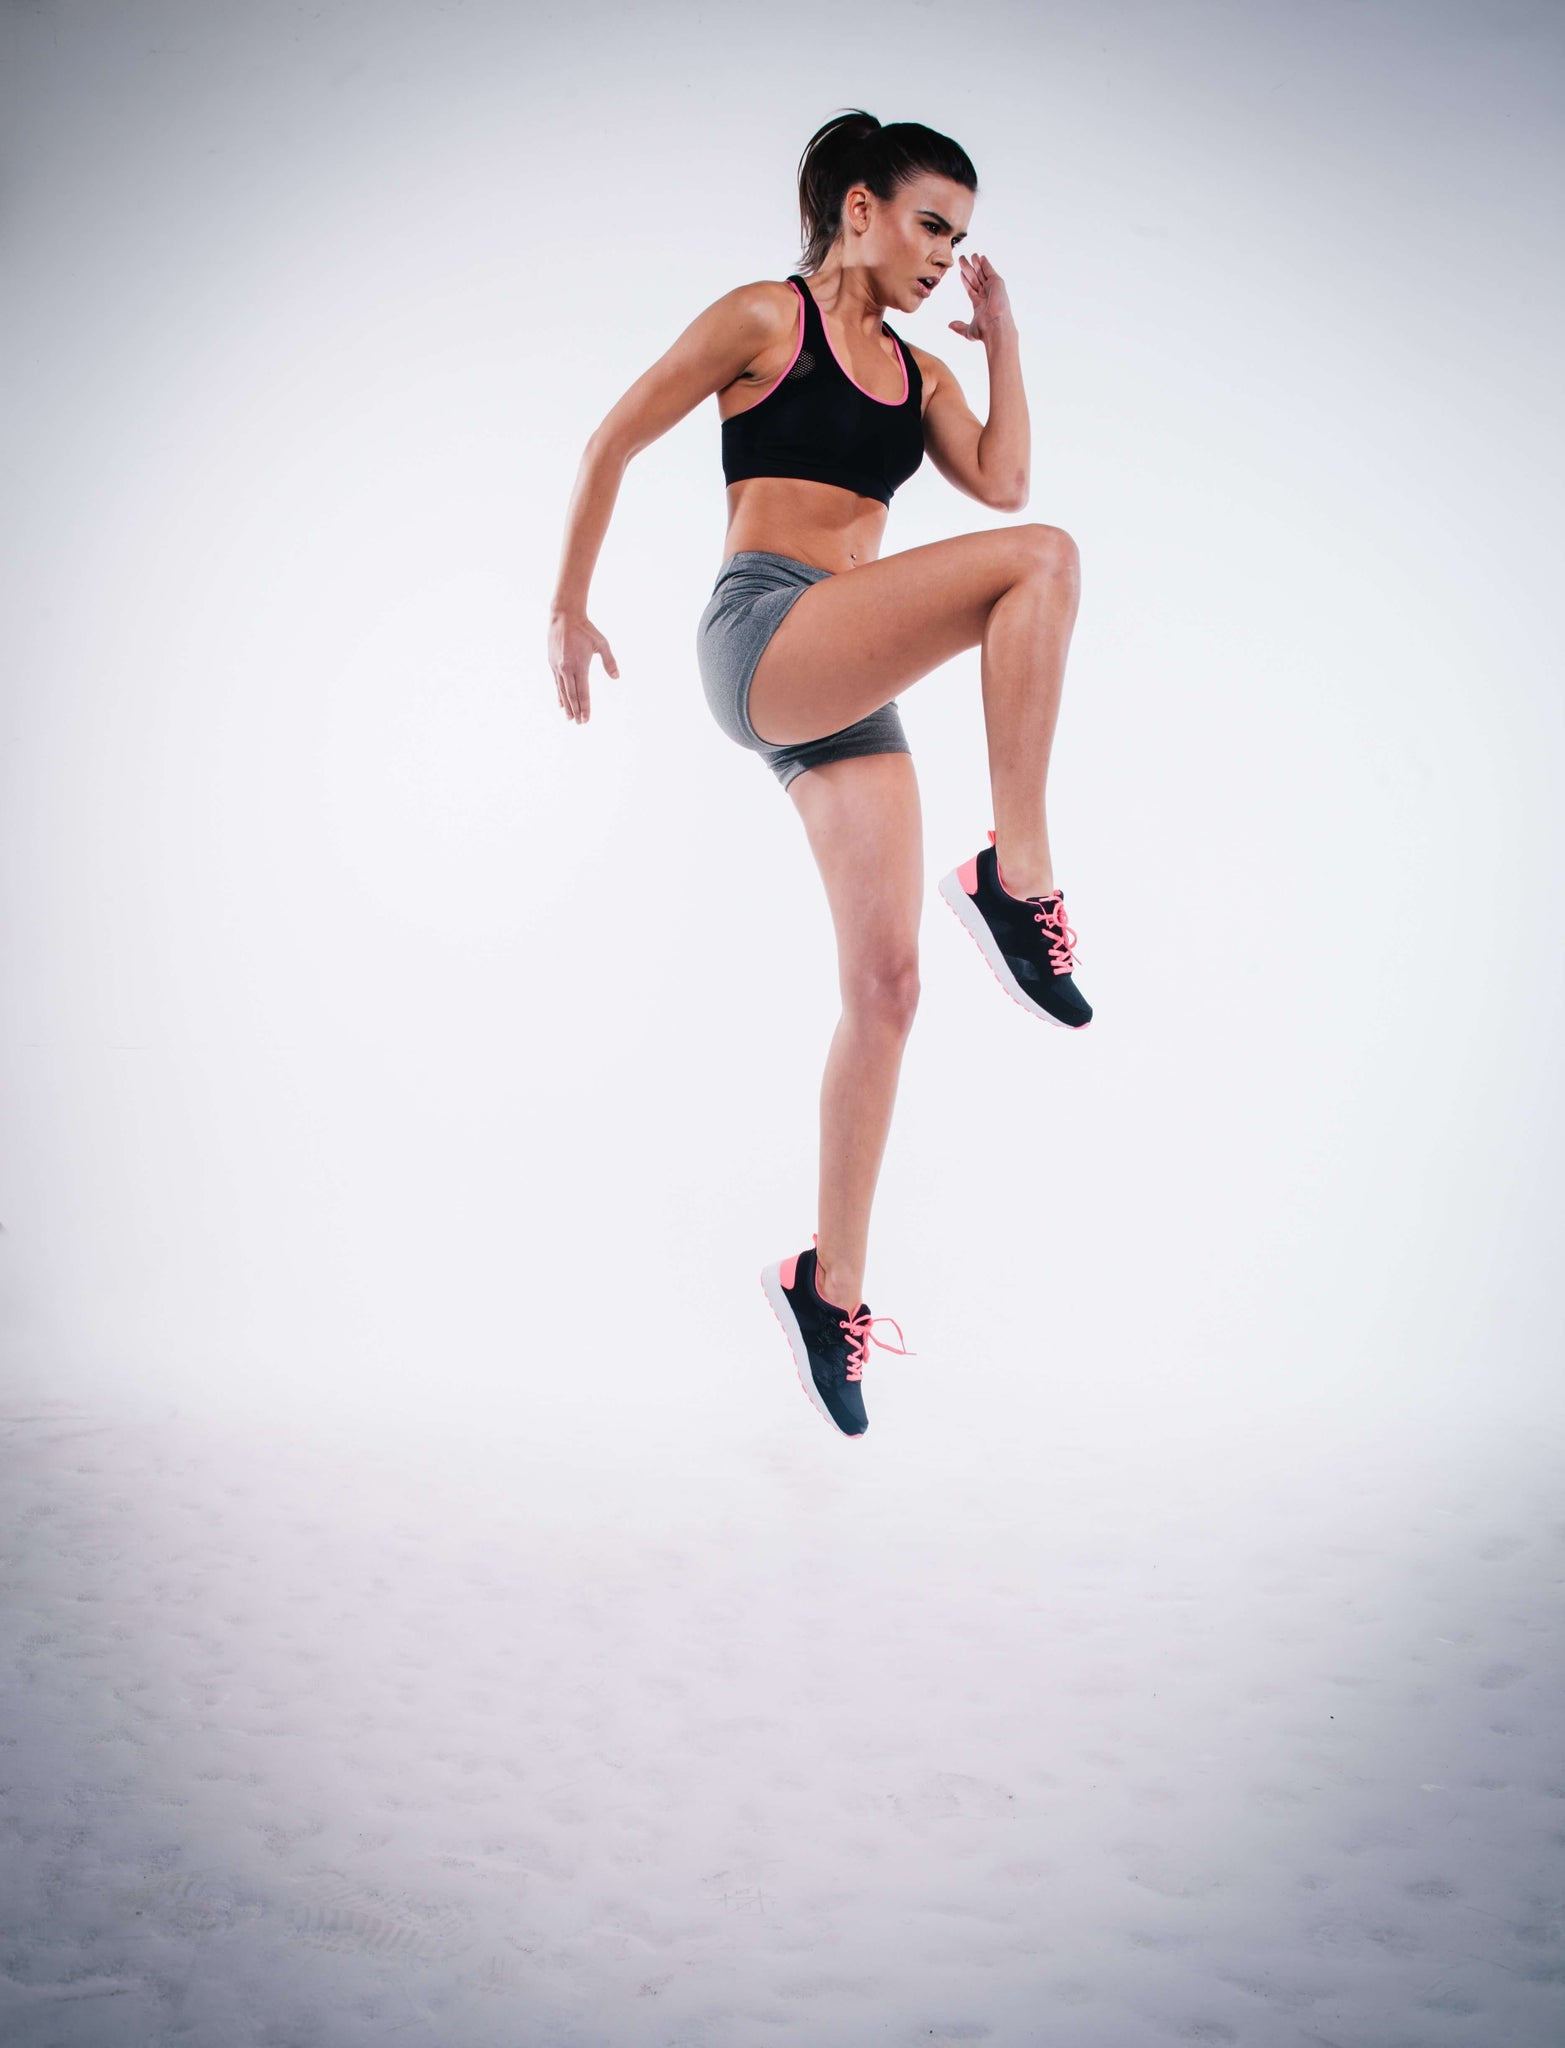 Legal Considerations for including Exercise Videos on your website